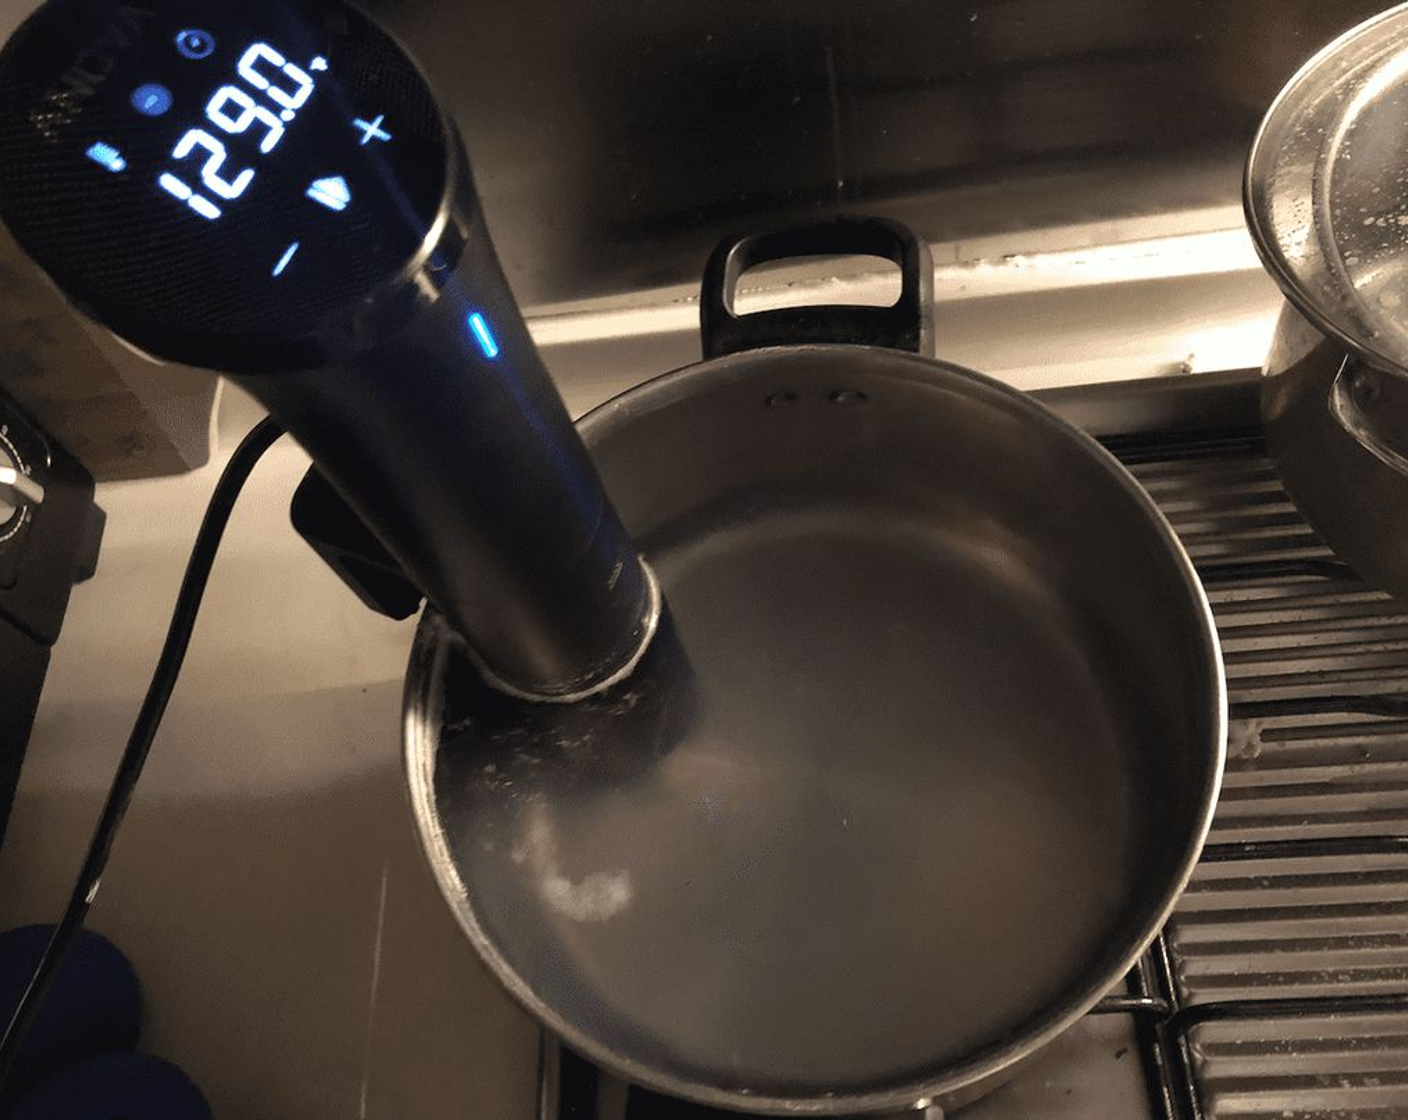 step 2 Fill a pot with water and fasten the sous vide machine to the side. Let the water come up to 129 degrees F (54 degrees C).